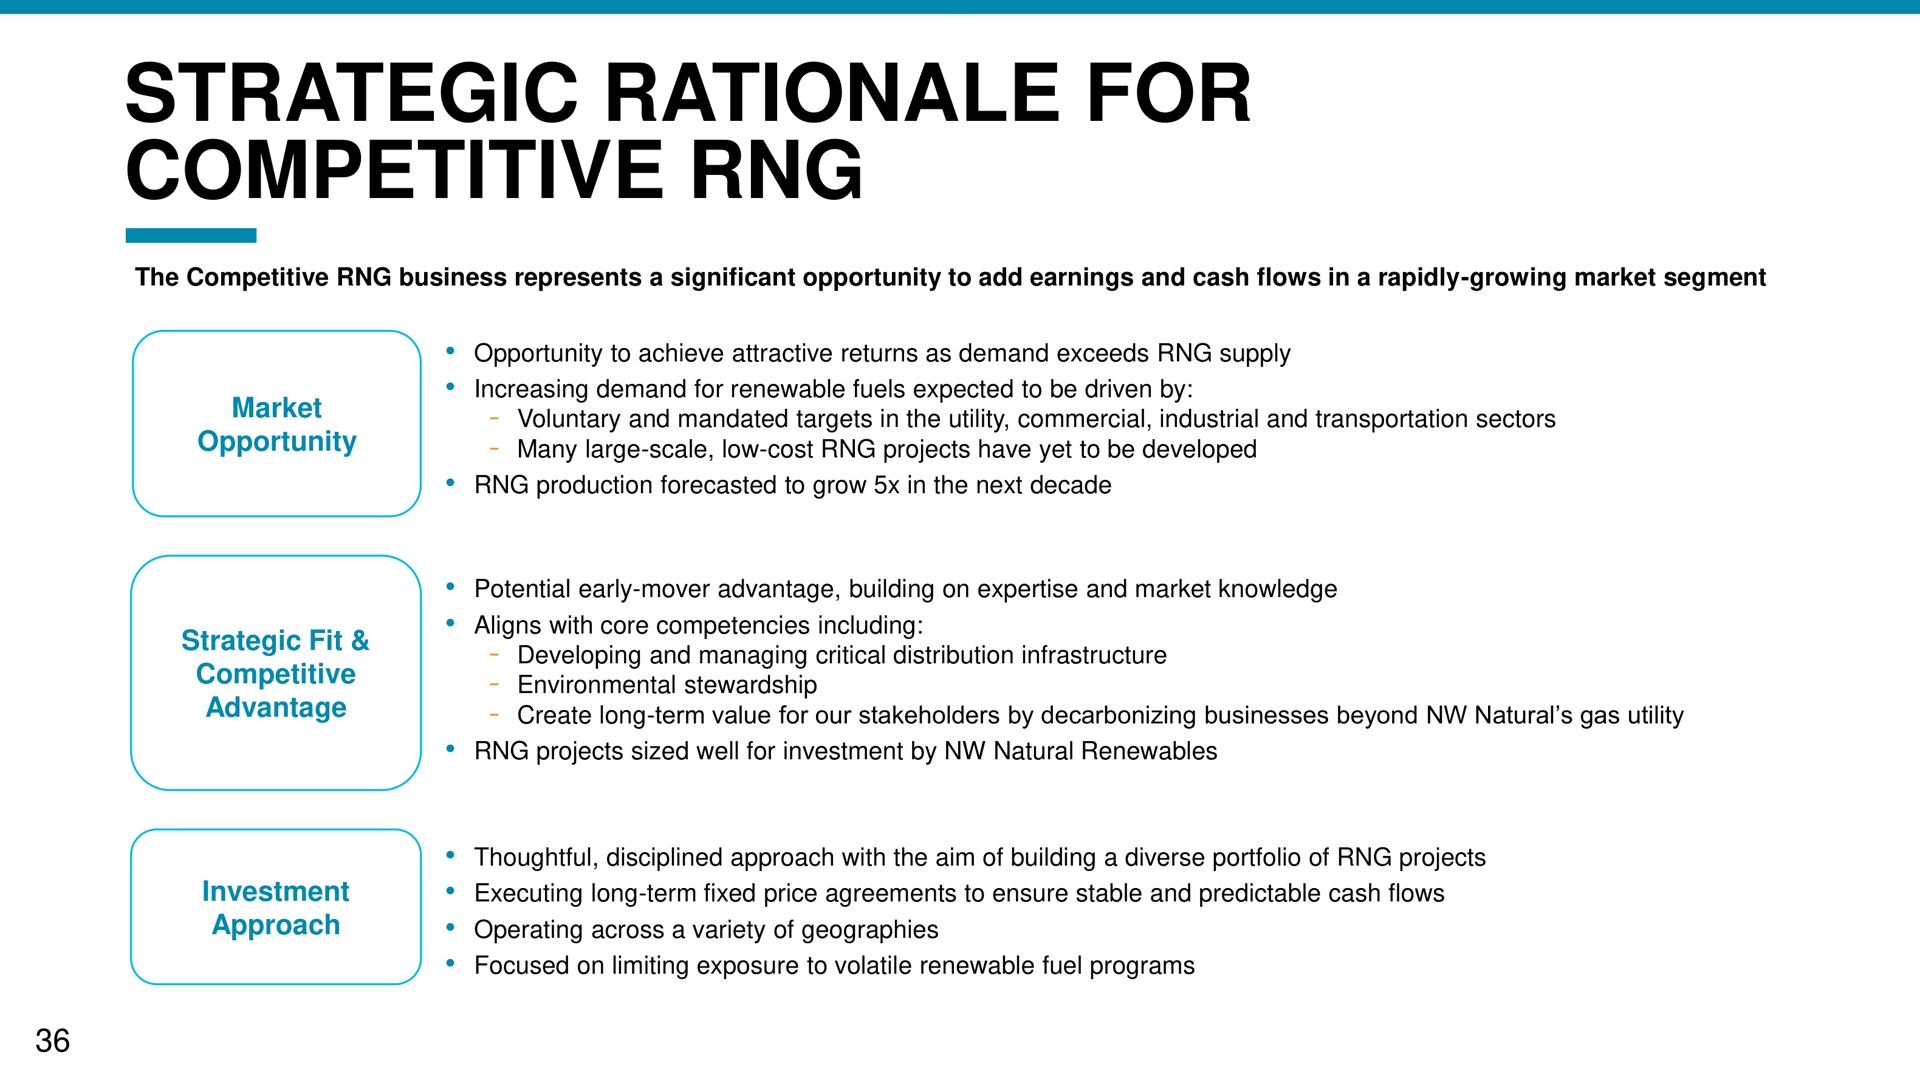 strategic rationale for competitive | NW Natural Holdings